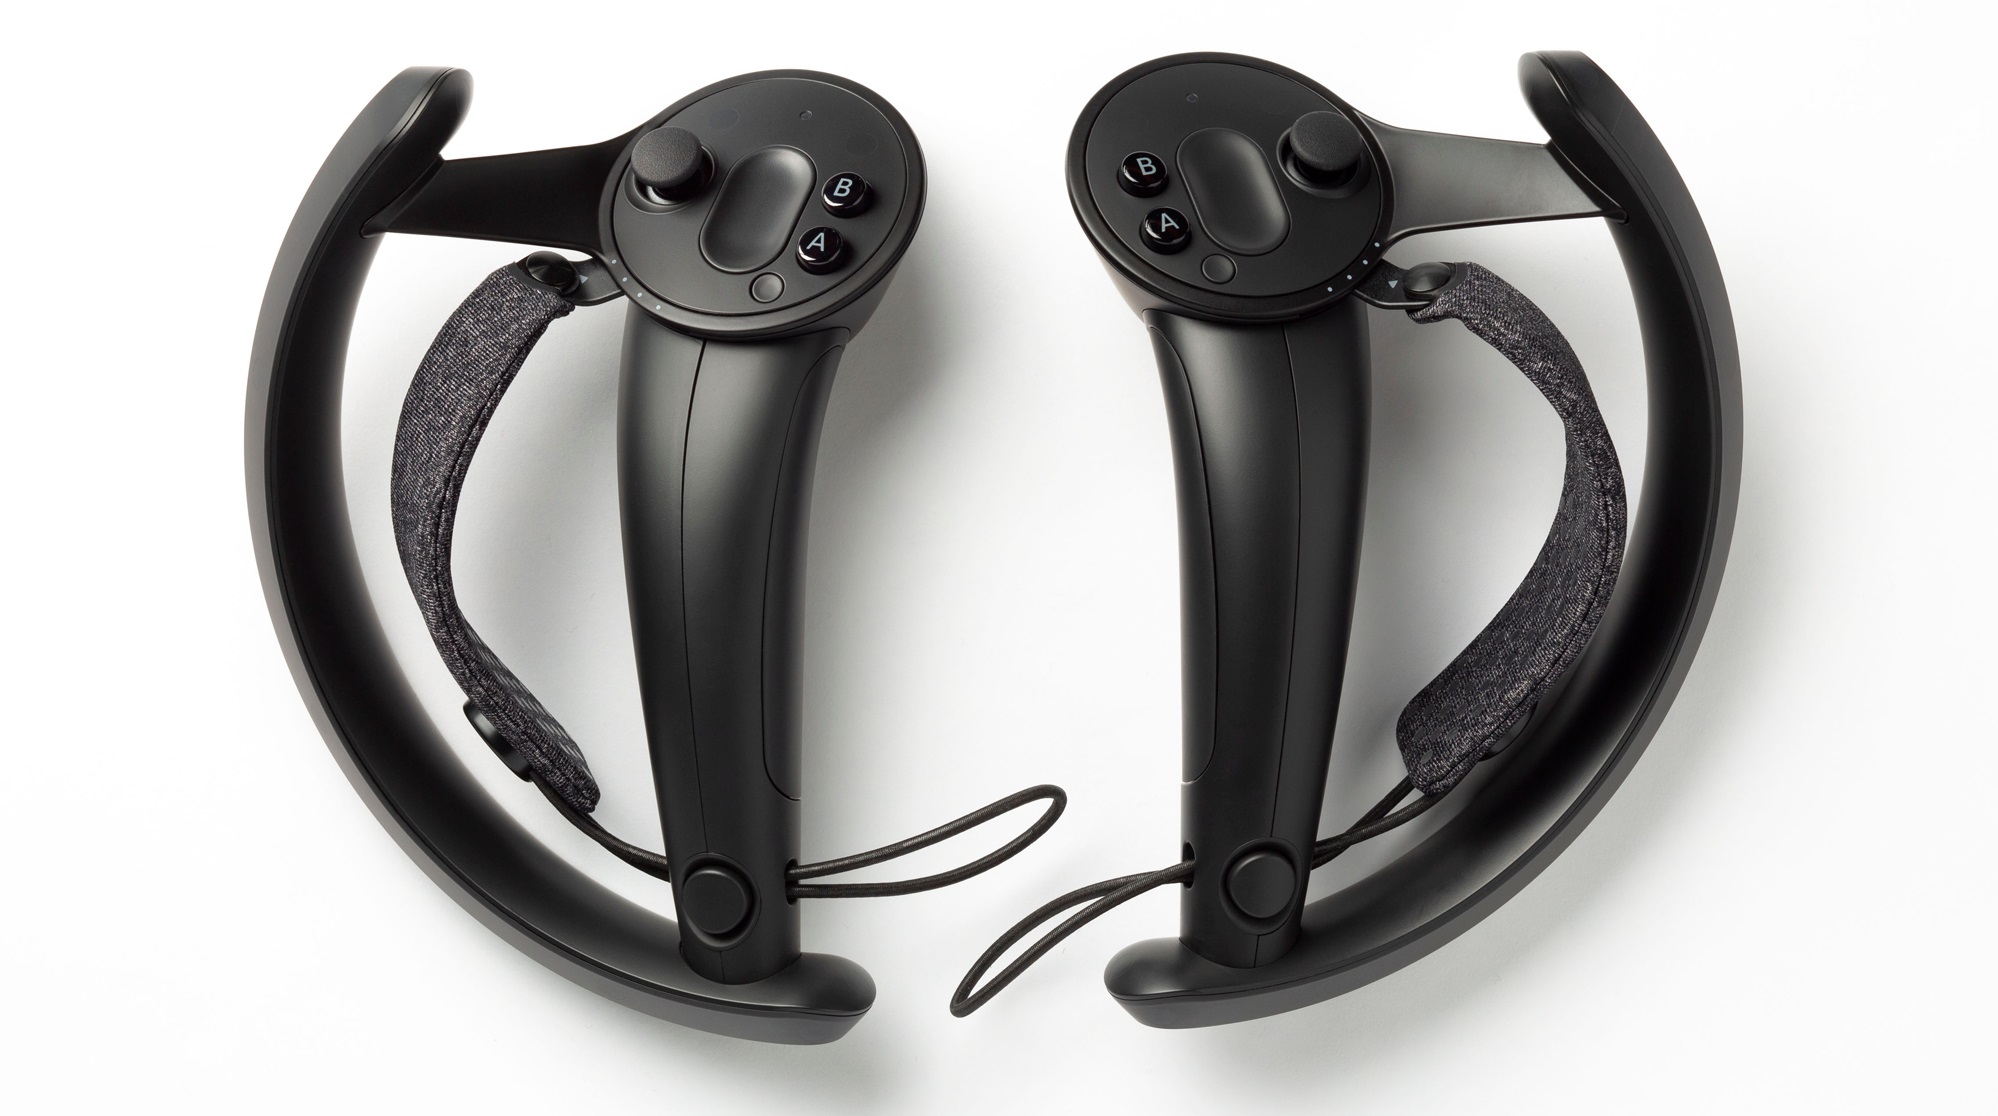 Valve Reveals News Knuckles VR Controllers With Improved And More